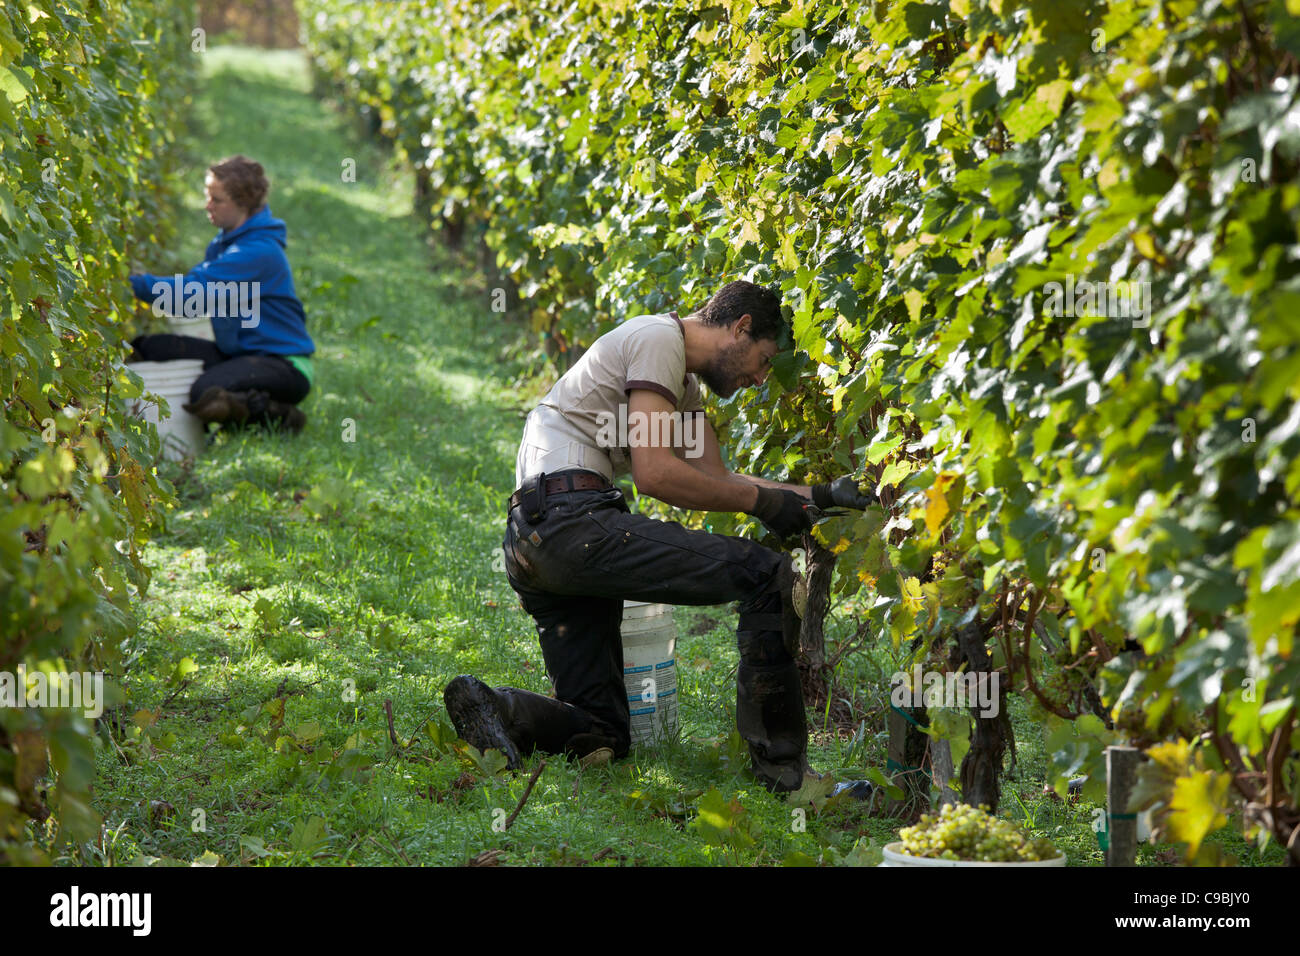 Man and woman harvesting grapes for wine production. Stock Photo